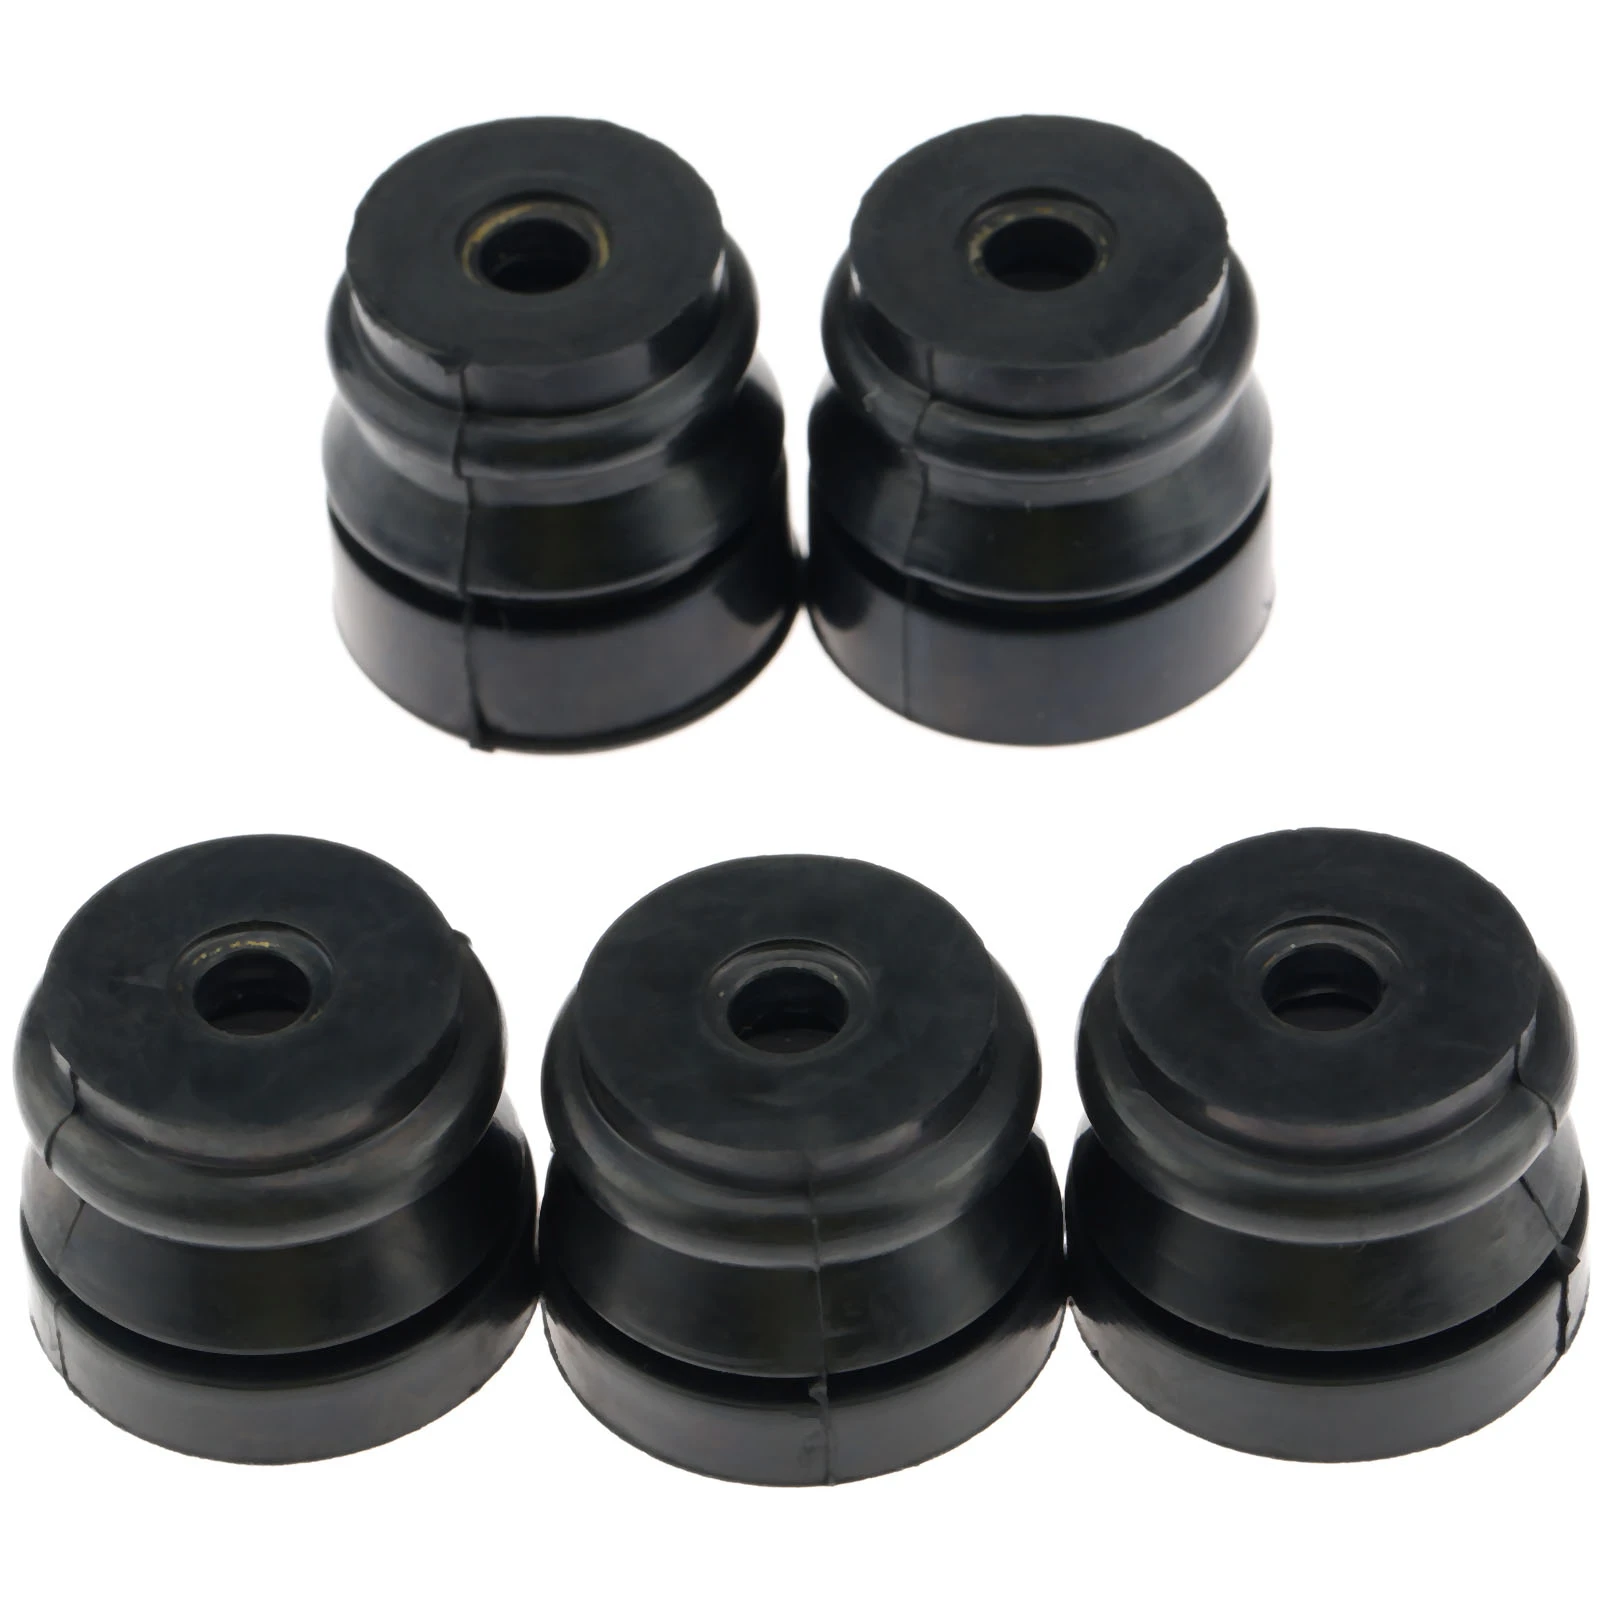 5Pcs Tool Parts Chainsaw Spare Parts AV BUFFER SHOCK MOUNTING Daper Annular Buffer for Chinese Chainsaw 4500/5200/5800/43cc/45cc